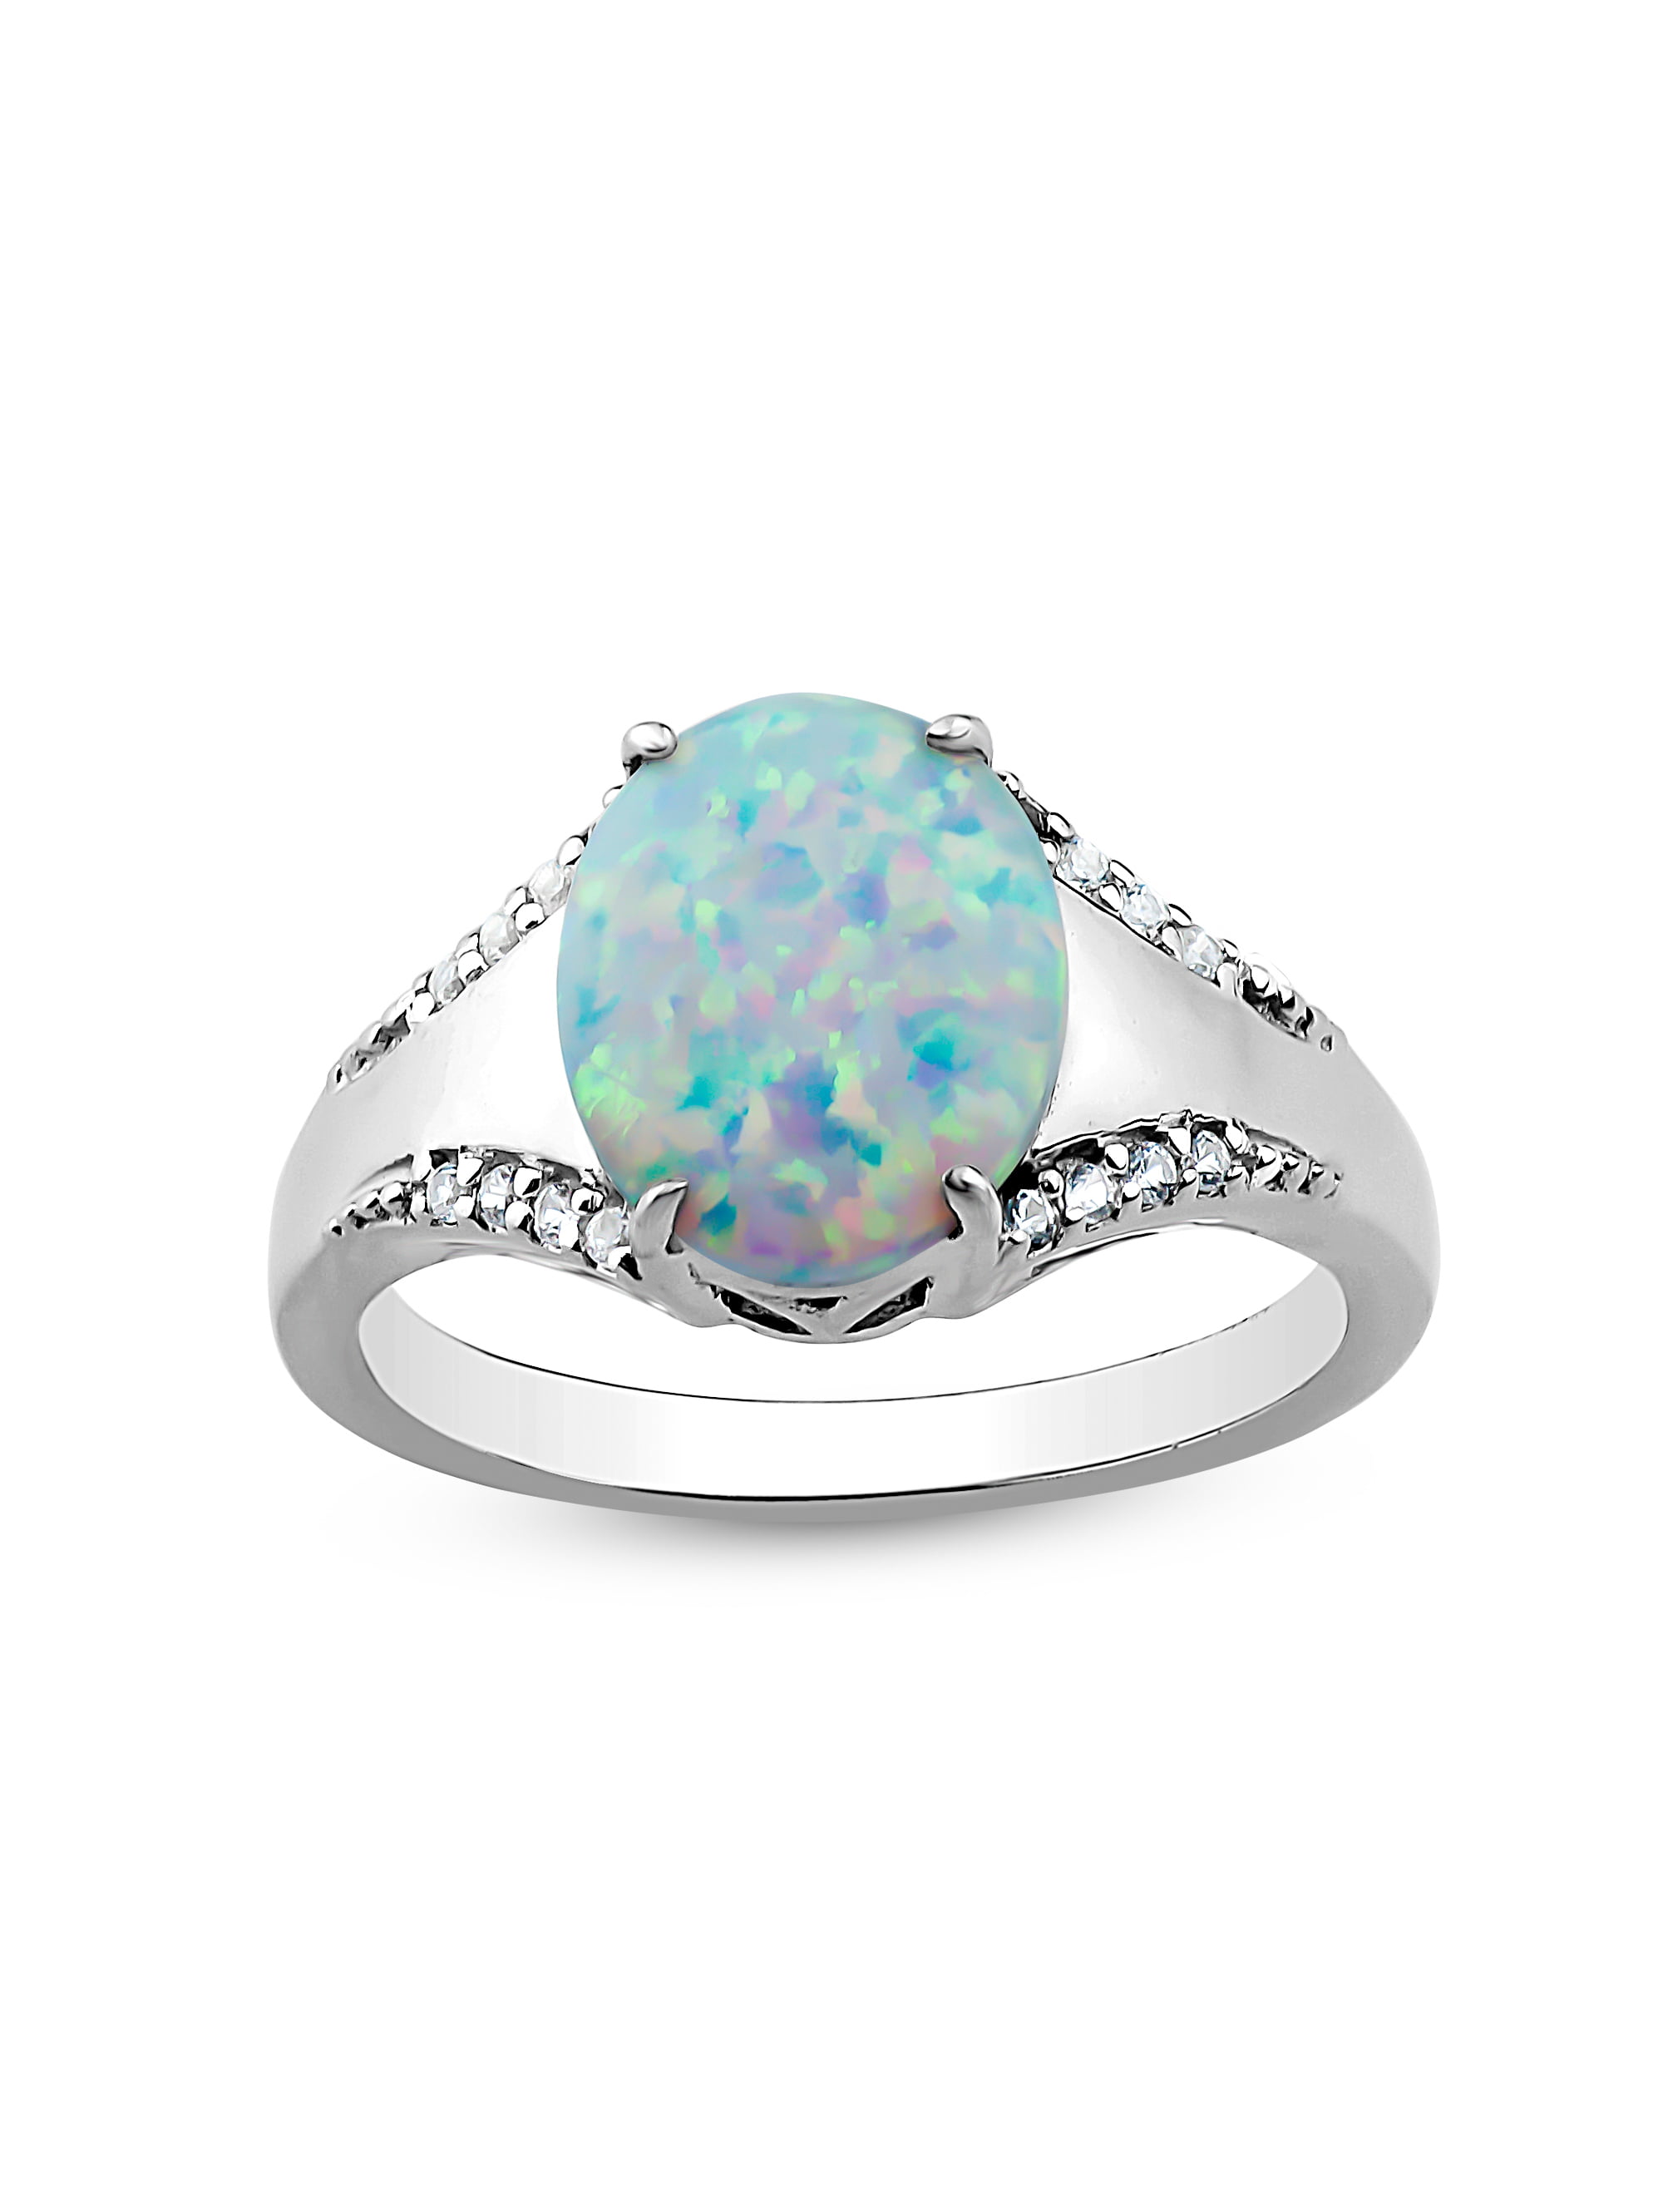 Forever New Created Opal and White Topaz Sterling Silver Oval Ring ...